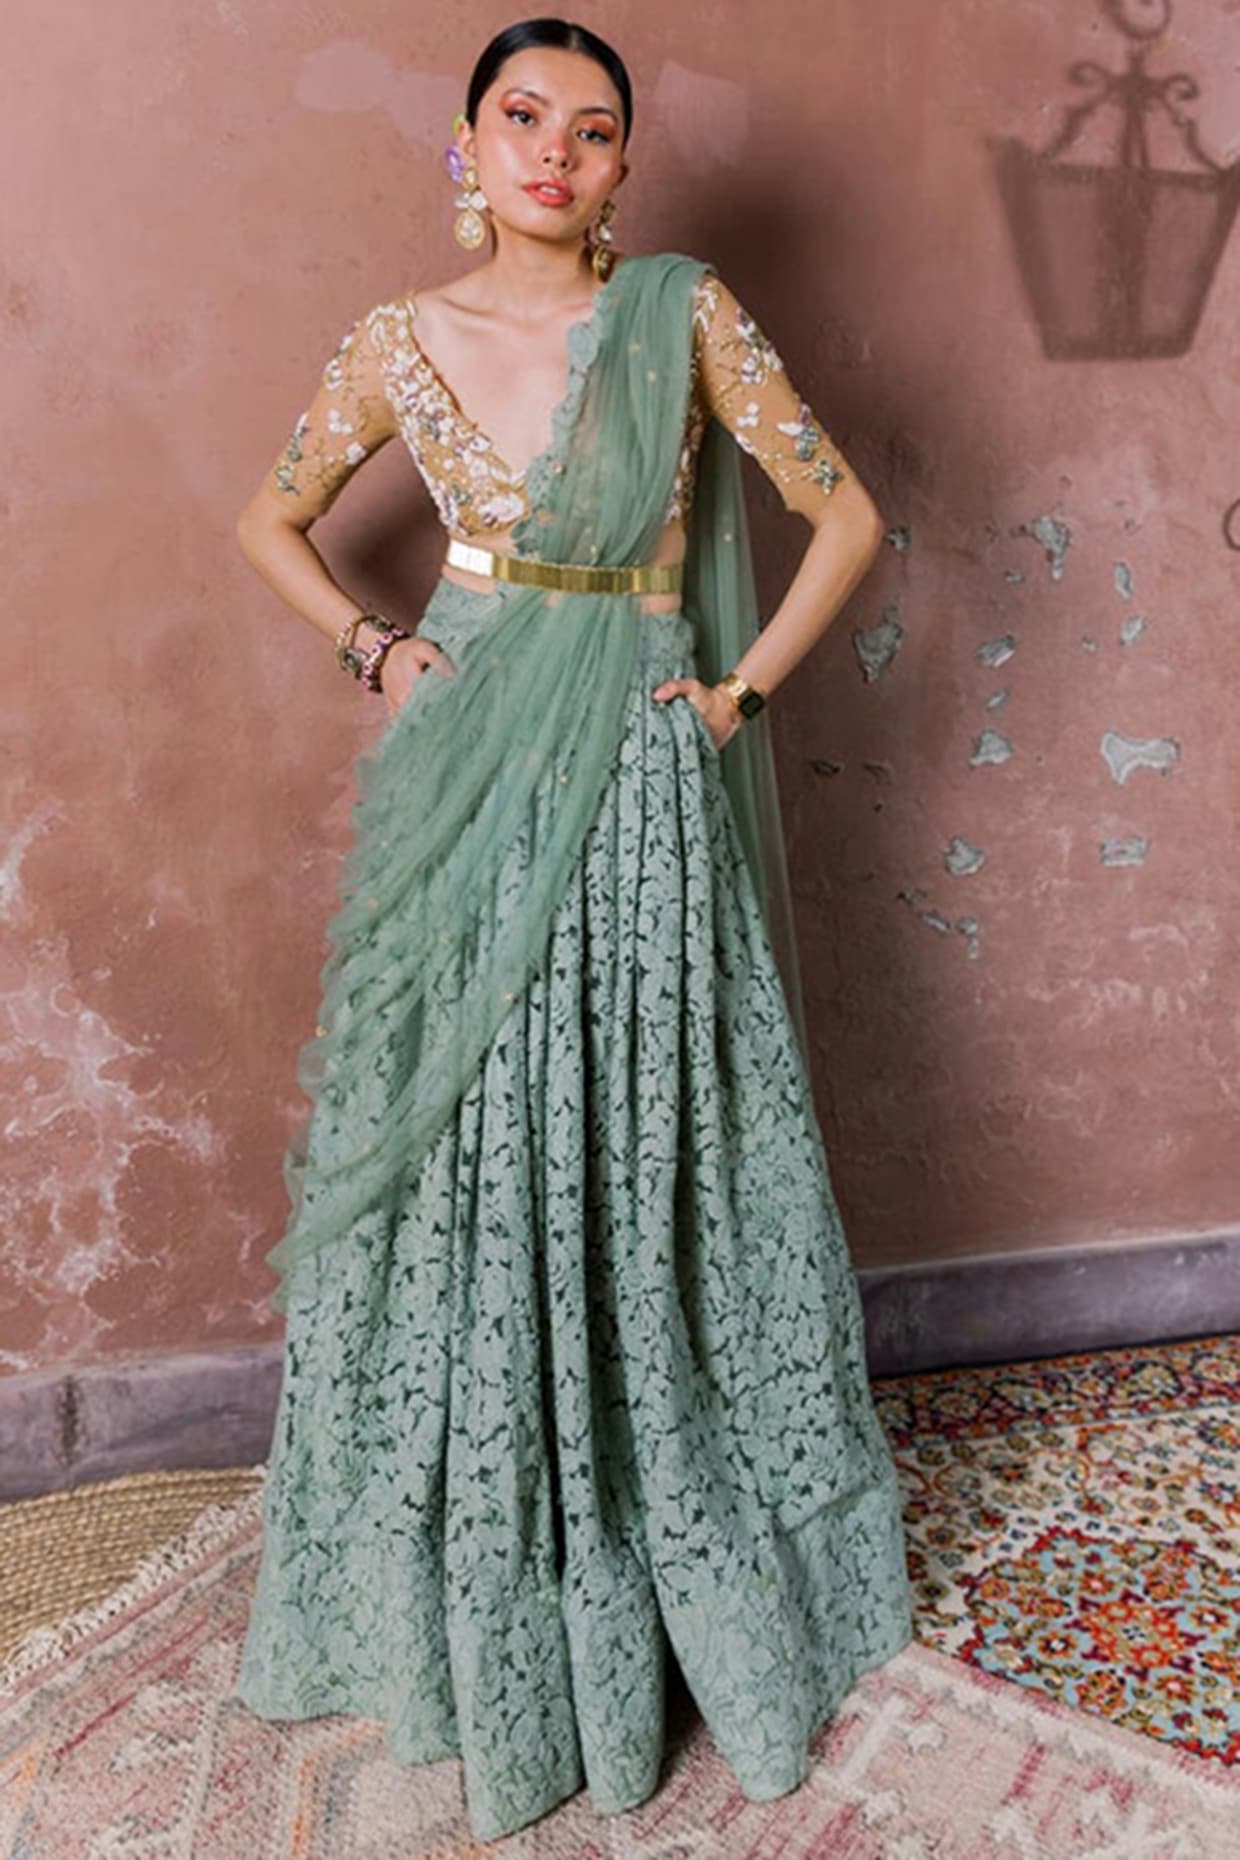 Buy 58/5XL Size Front Slit Engagement Indian Dresses Online for Women in USA